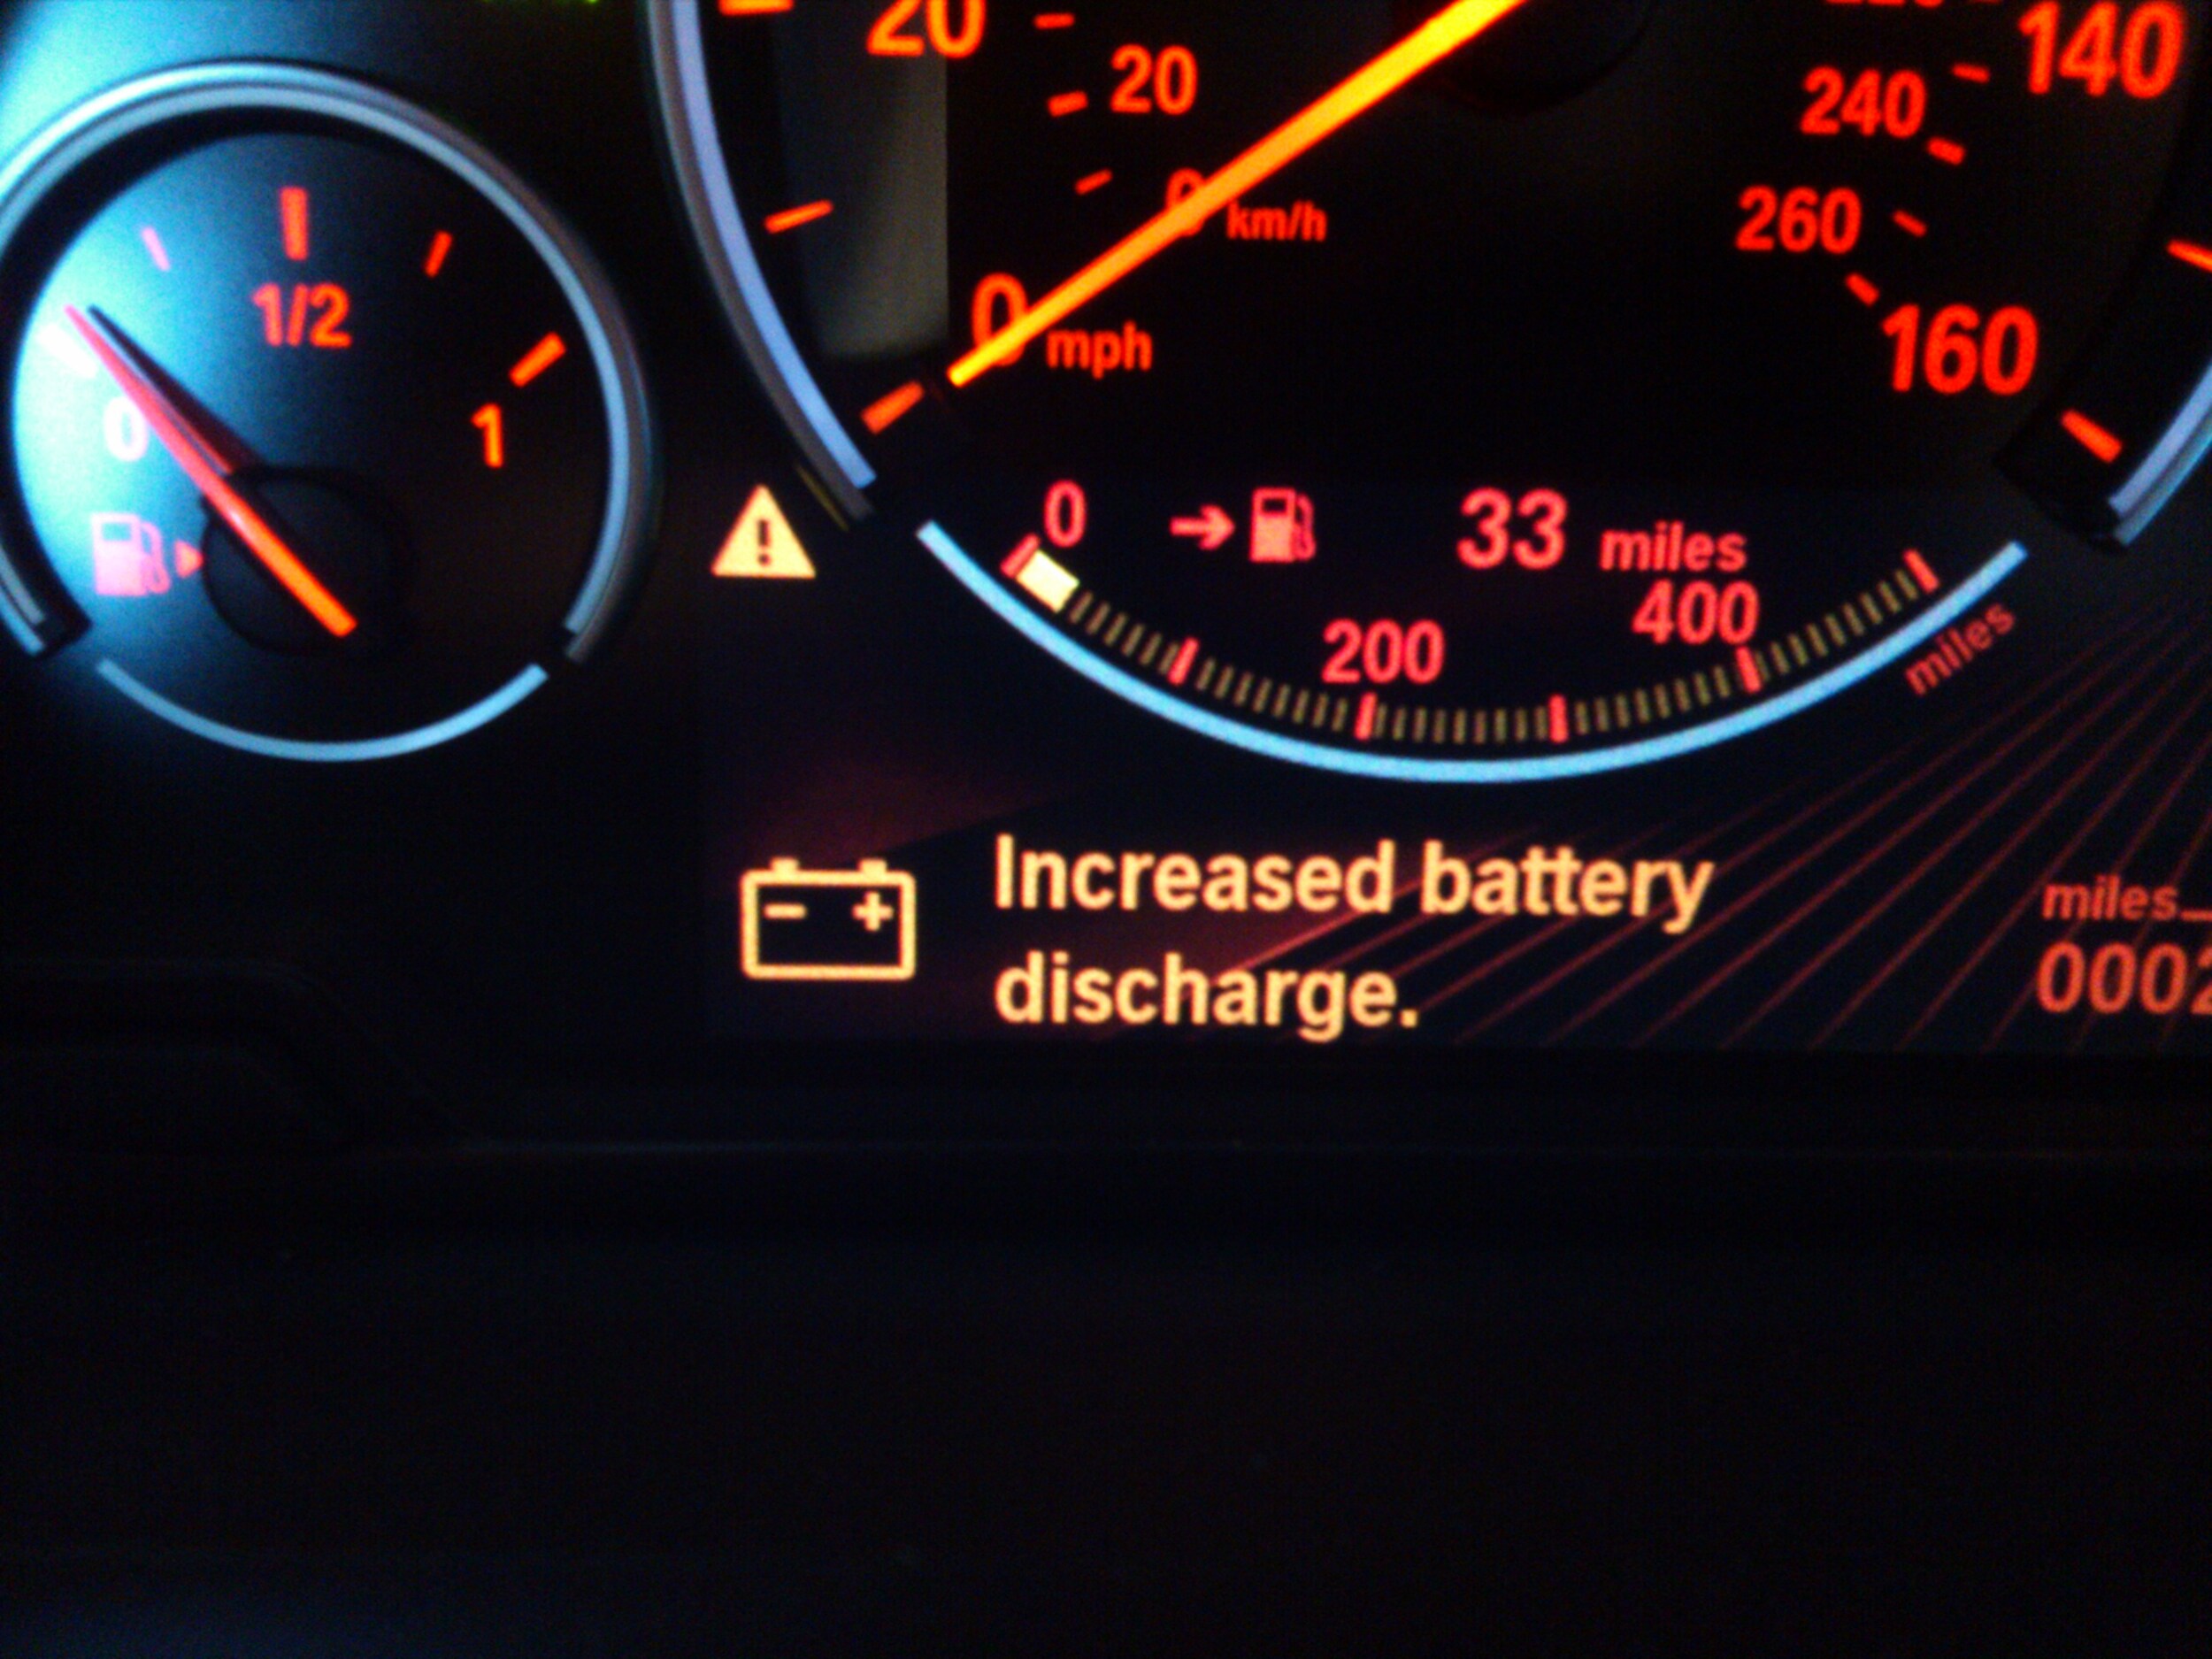 Bmw battery discharge message #3